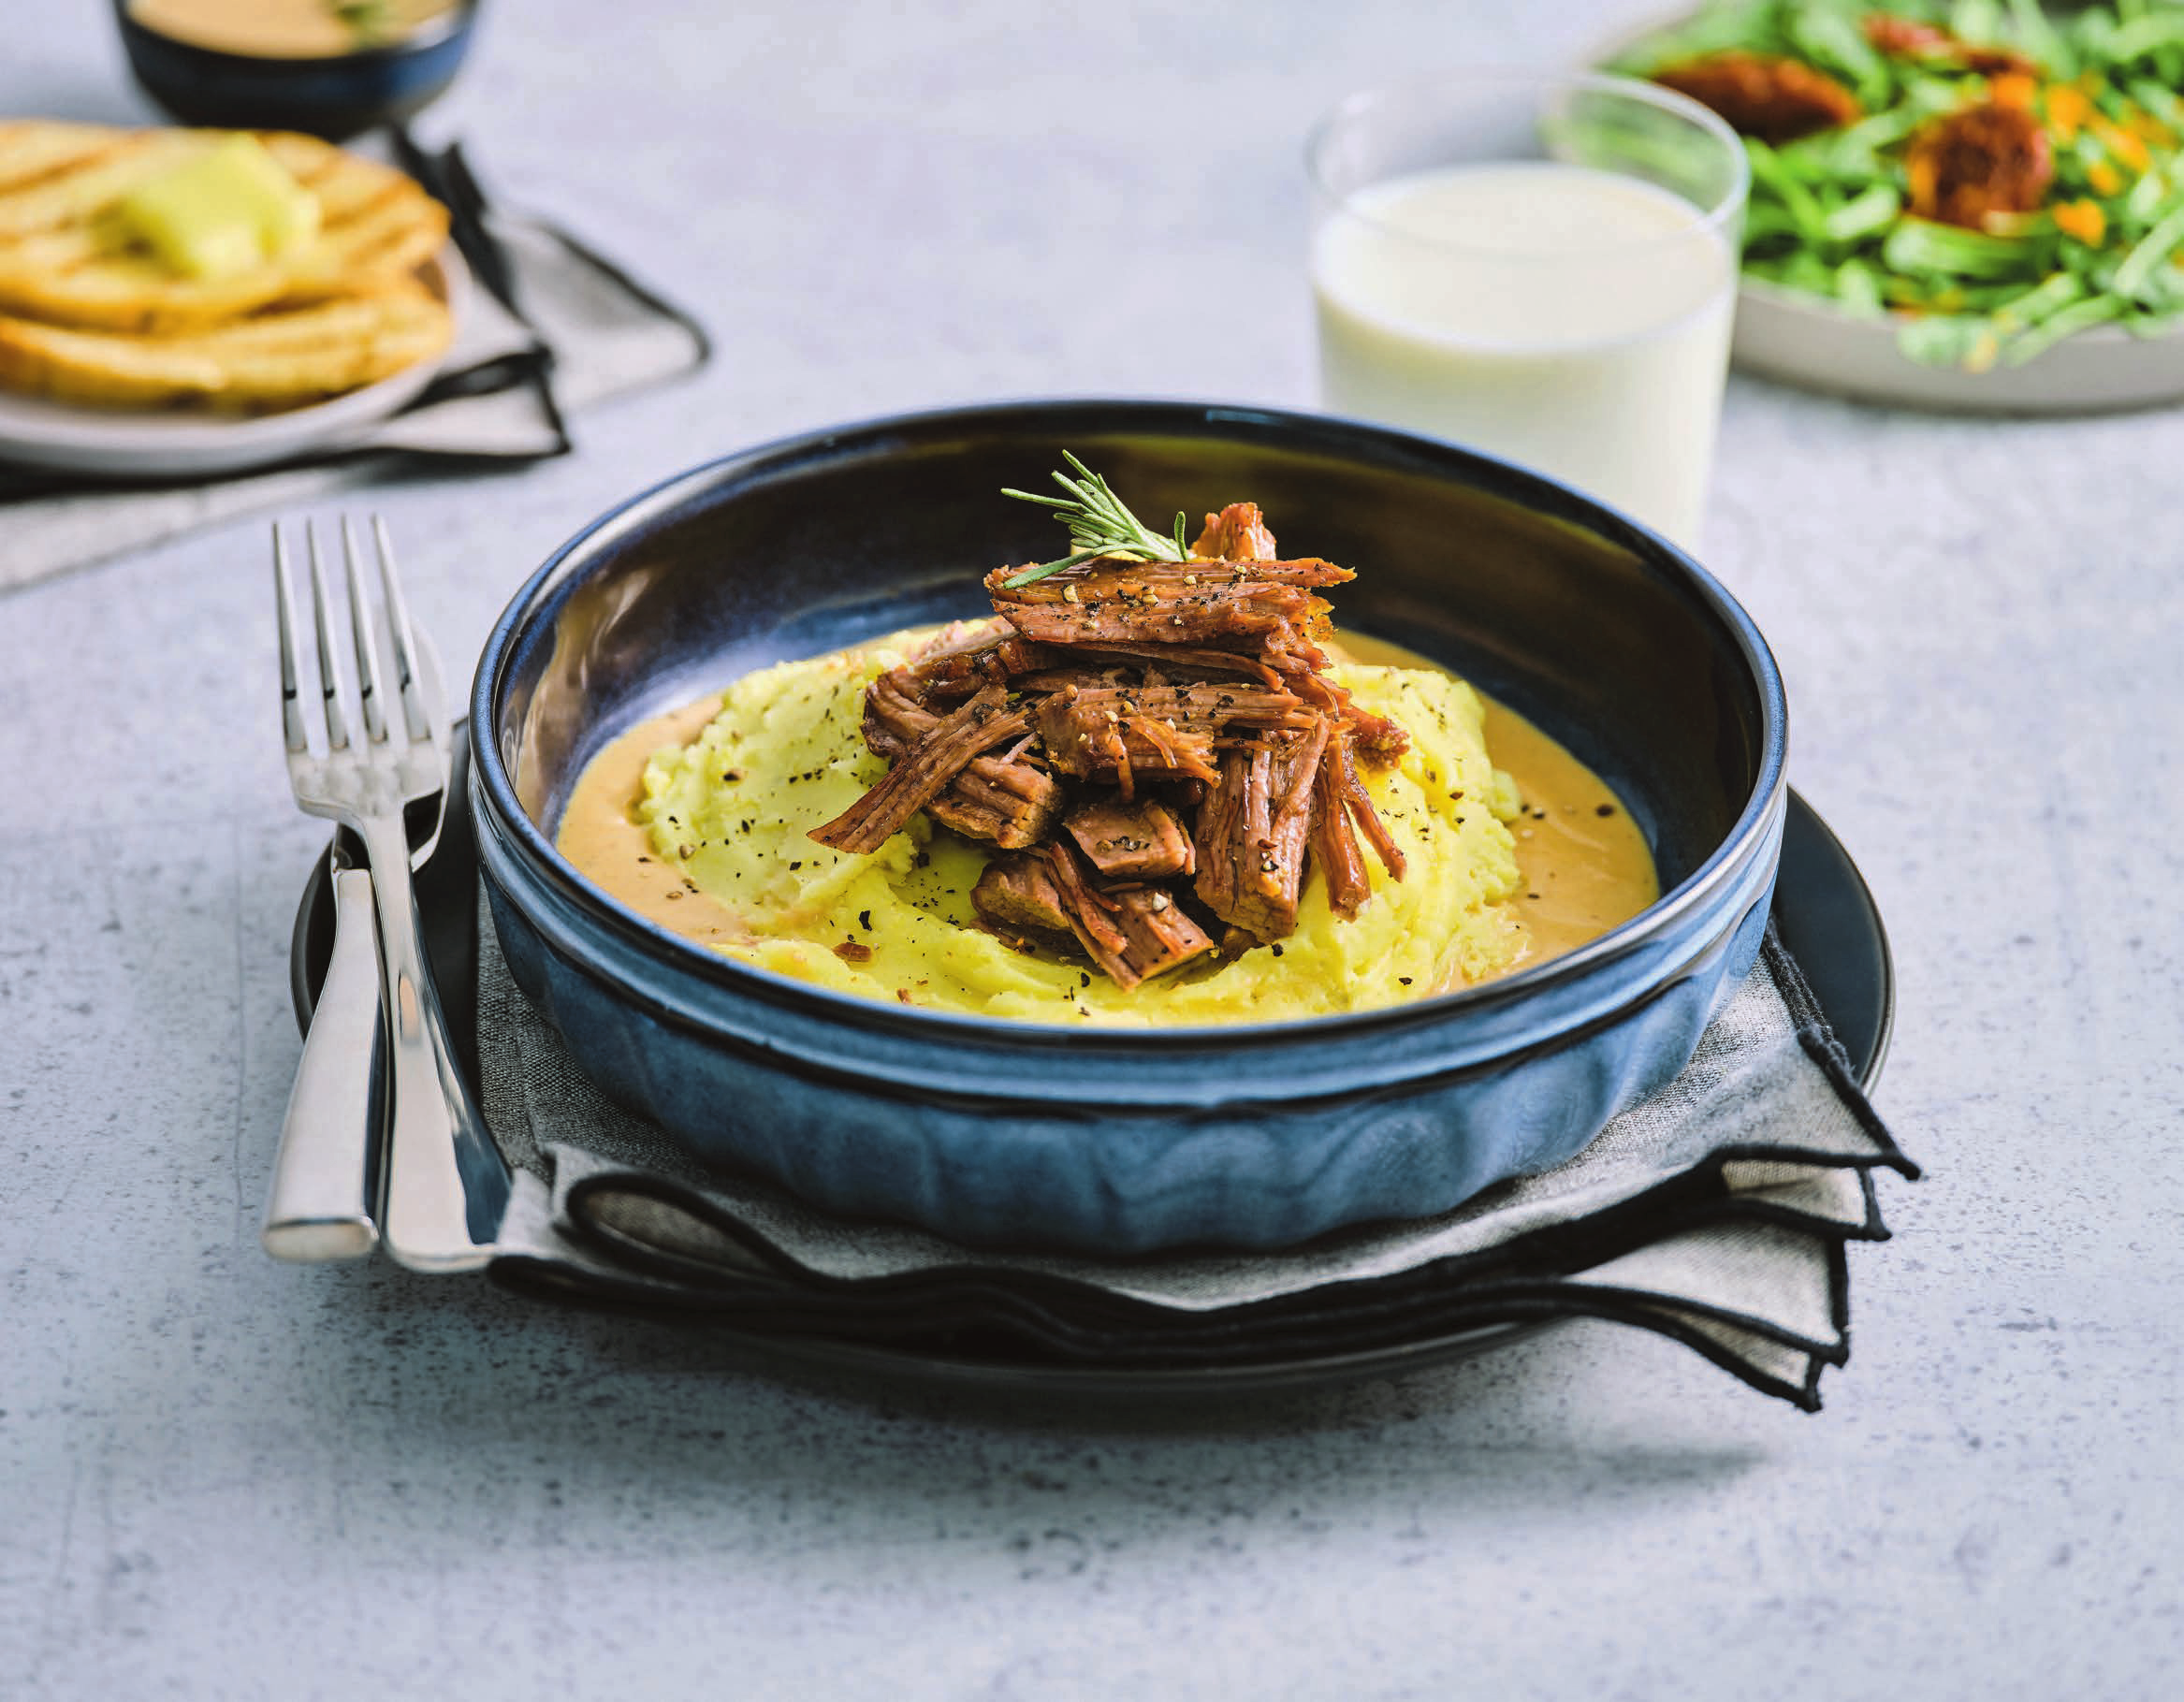 Milk Braised Beef with Garlic Whipped Potatoes